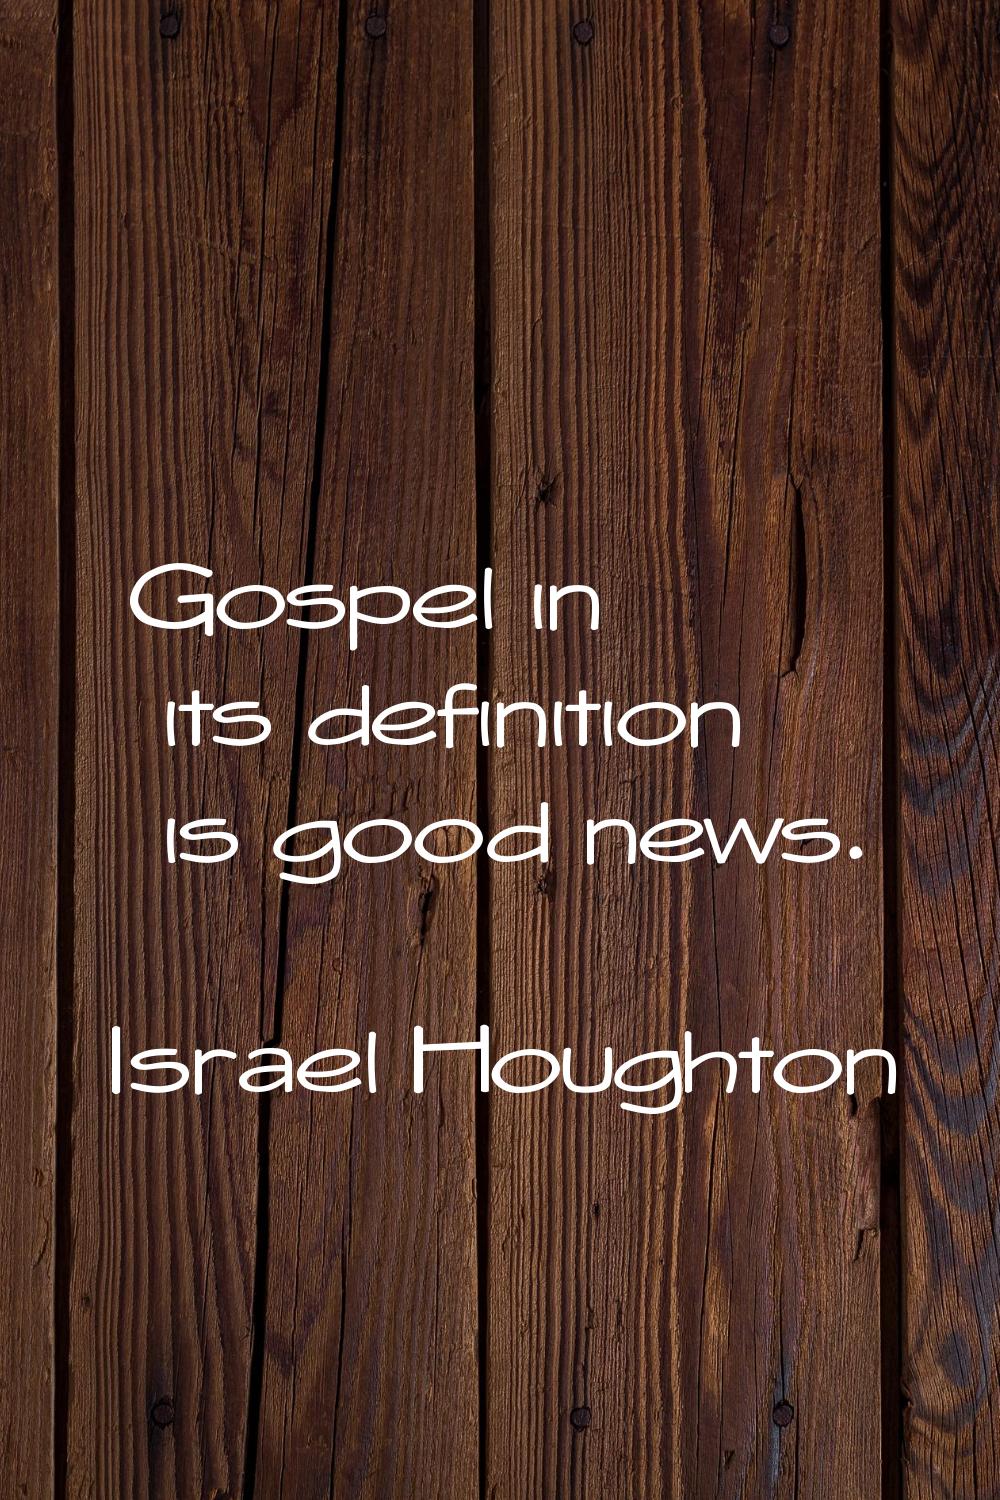 Gospel in its definition is good news.